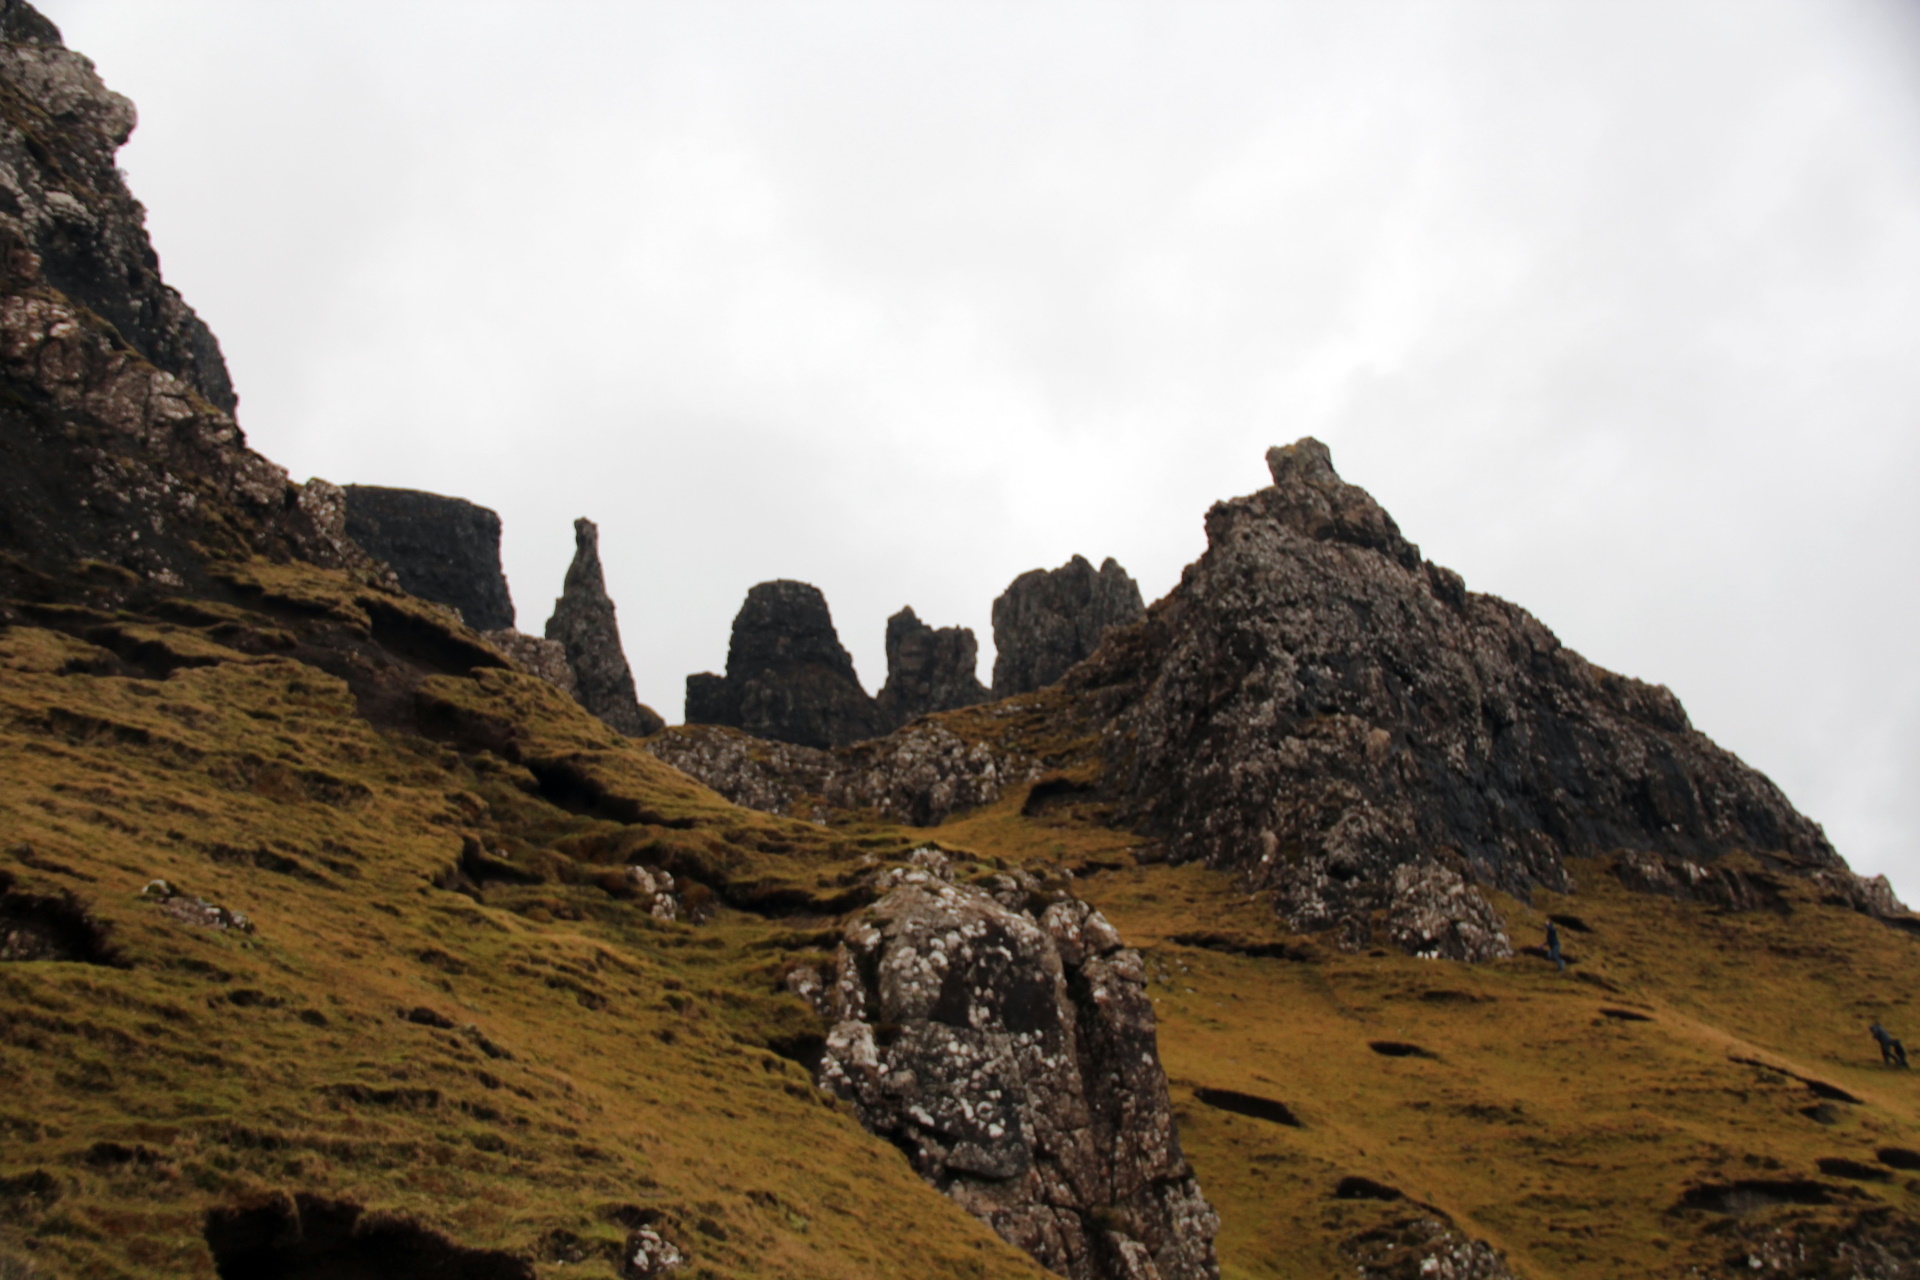 Looking up to the imposing pillars above Creag Loisgte